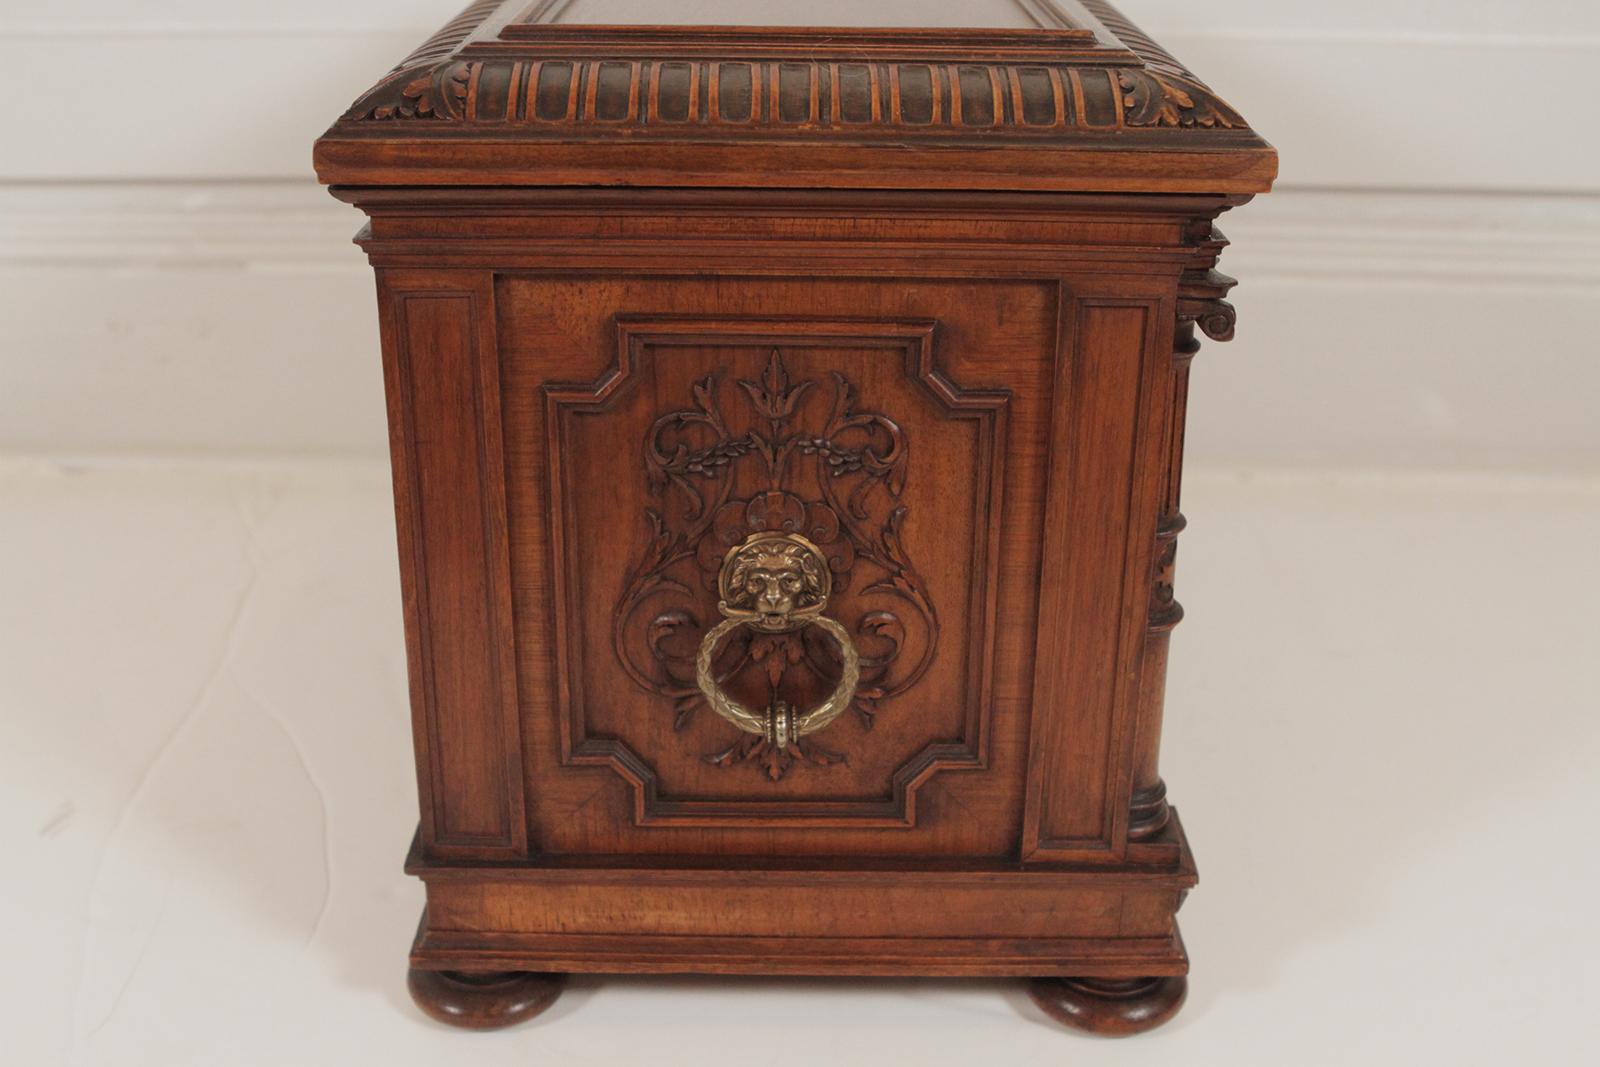 Hand-Carved 19th Century English Carved Walnut Two-Door Diminutive Chest